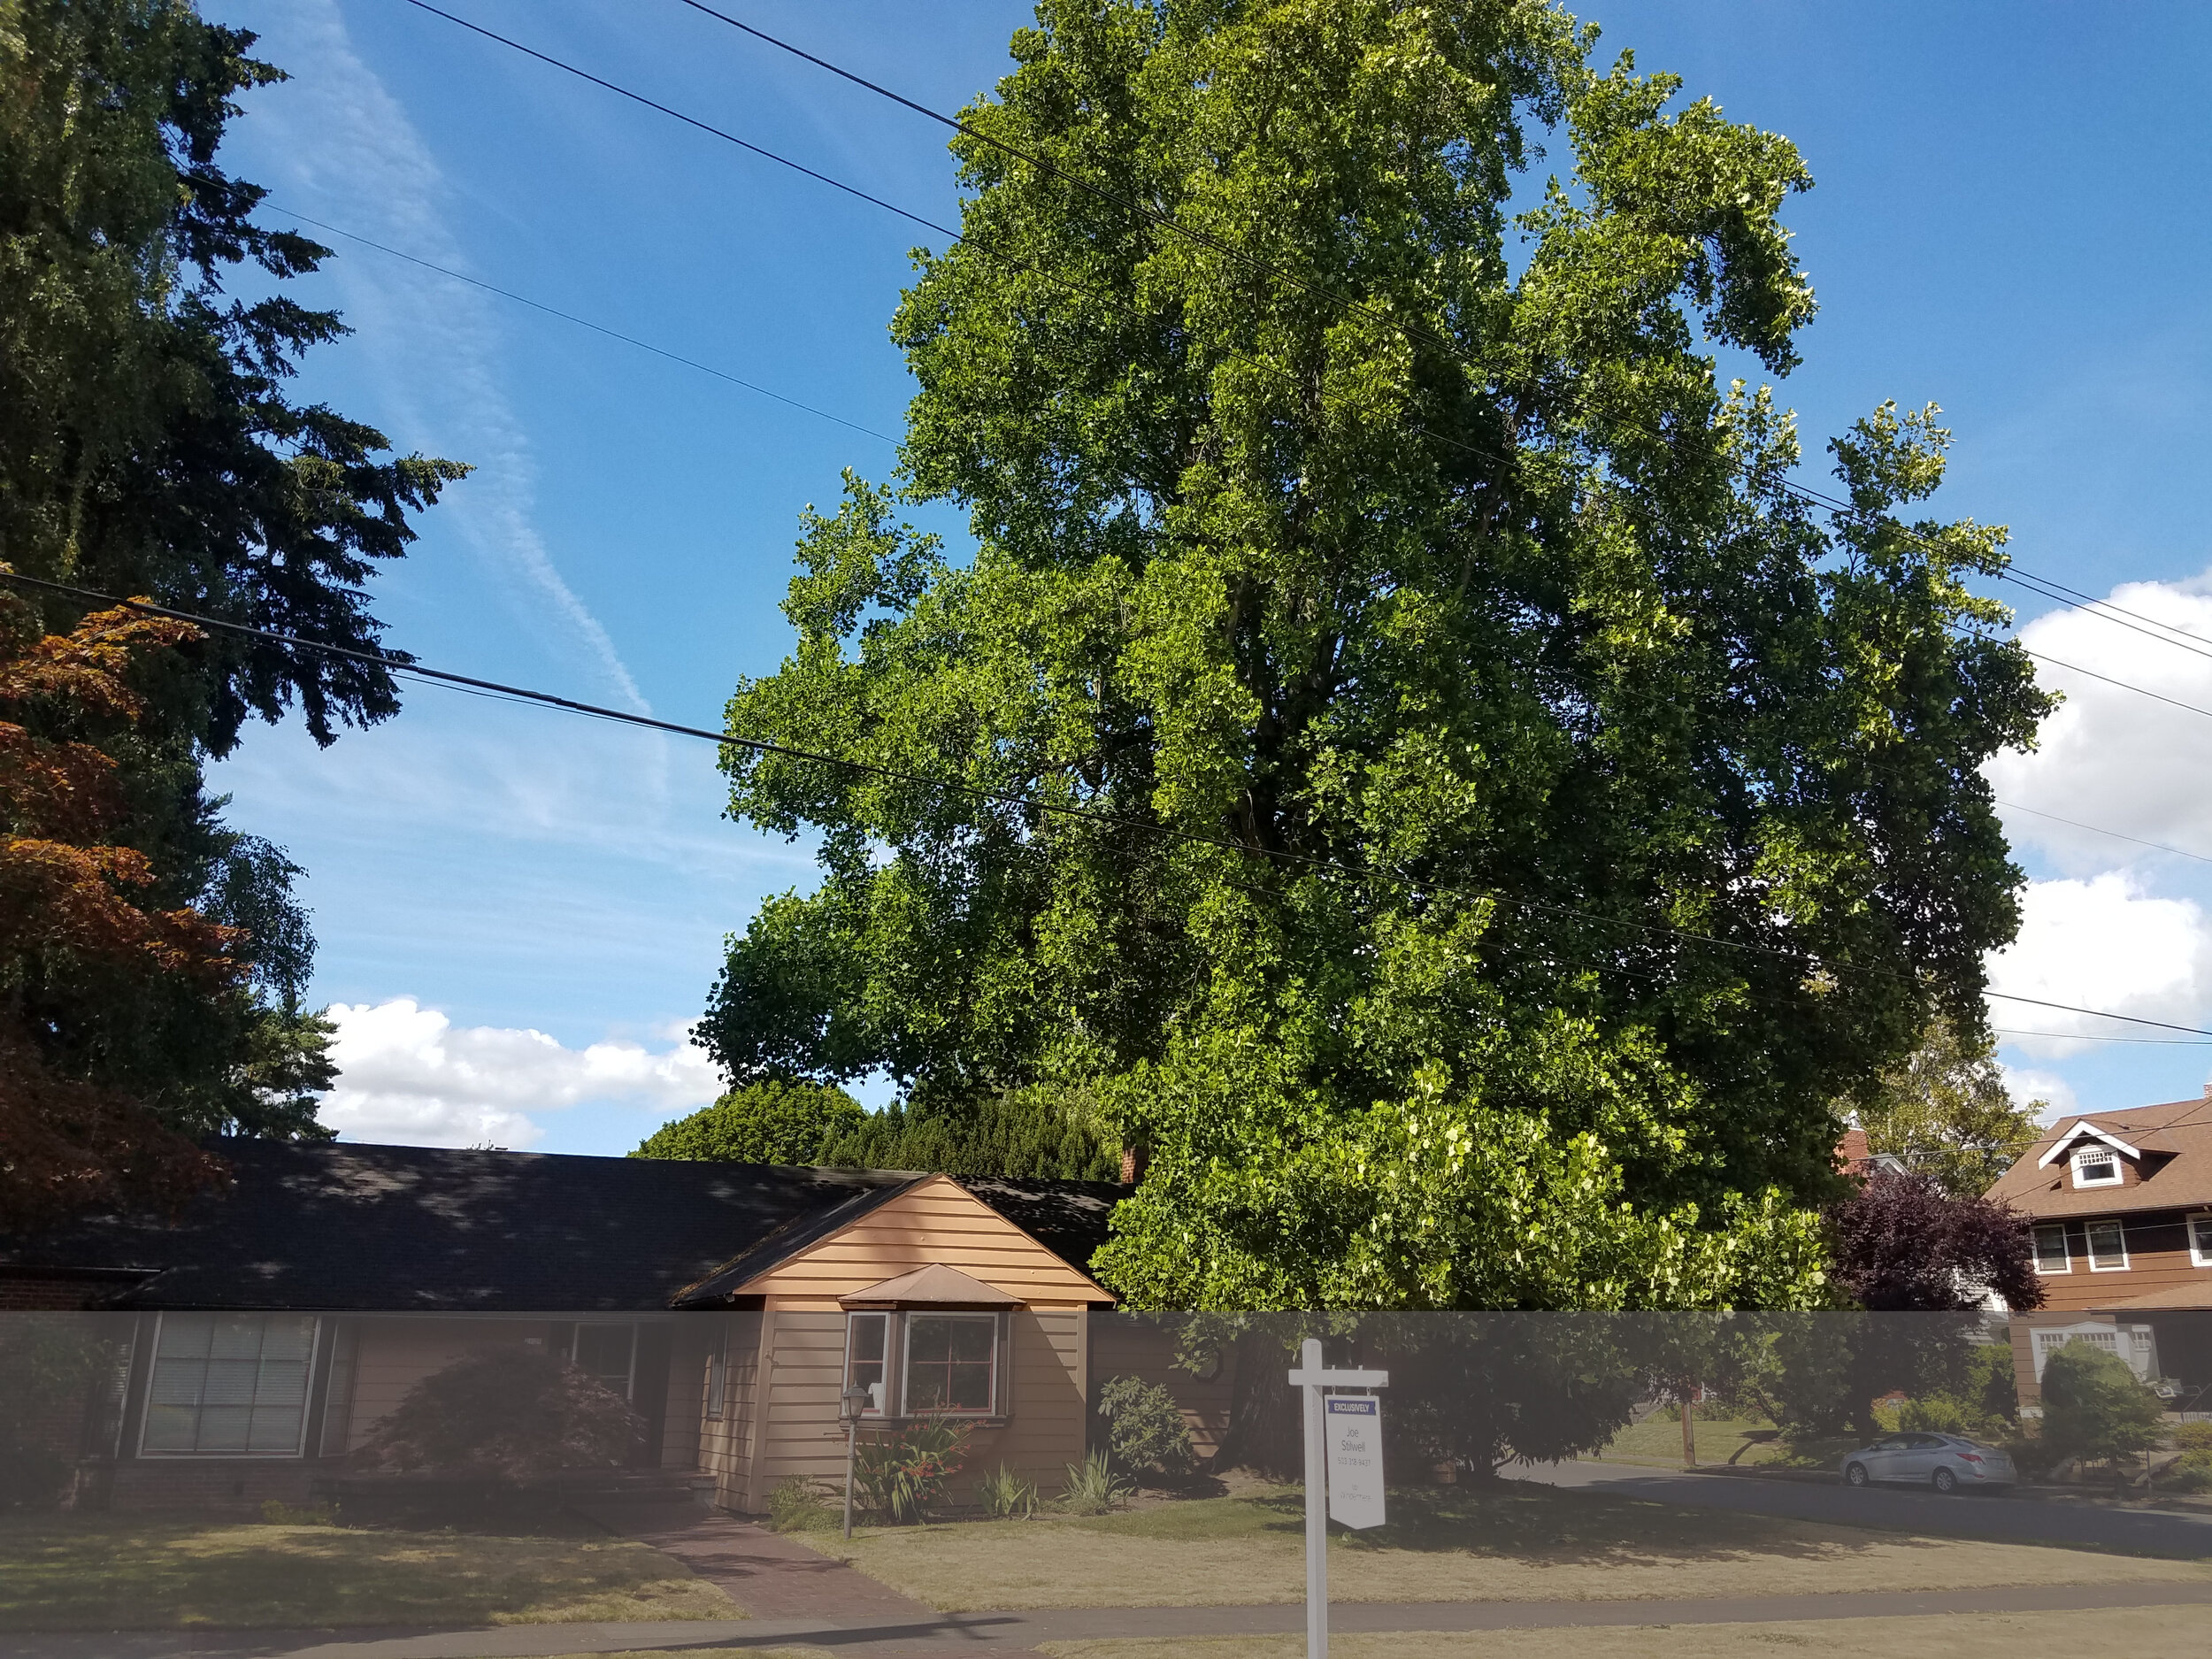 The huge tulip tree providing southside house shade at NE 22nd and Knott was intact when this home was for sale in 2020.